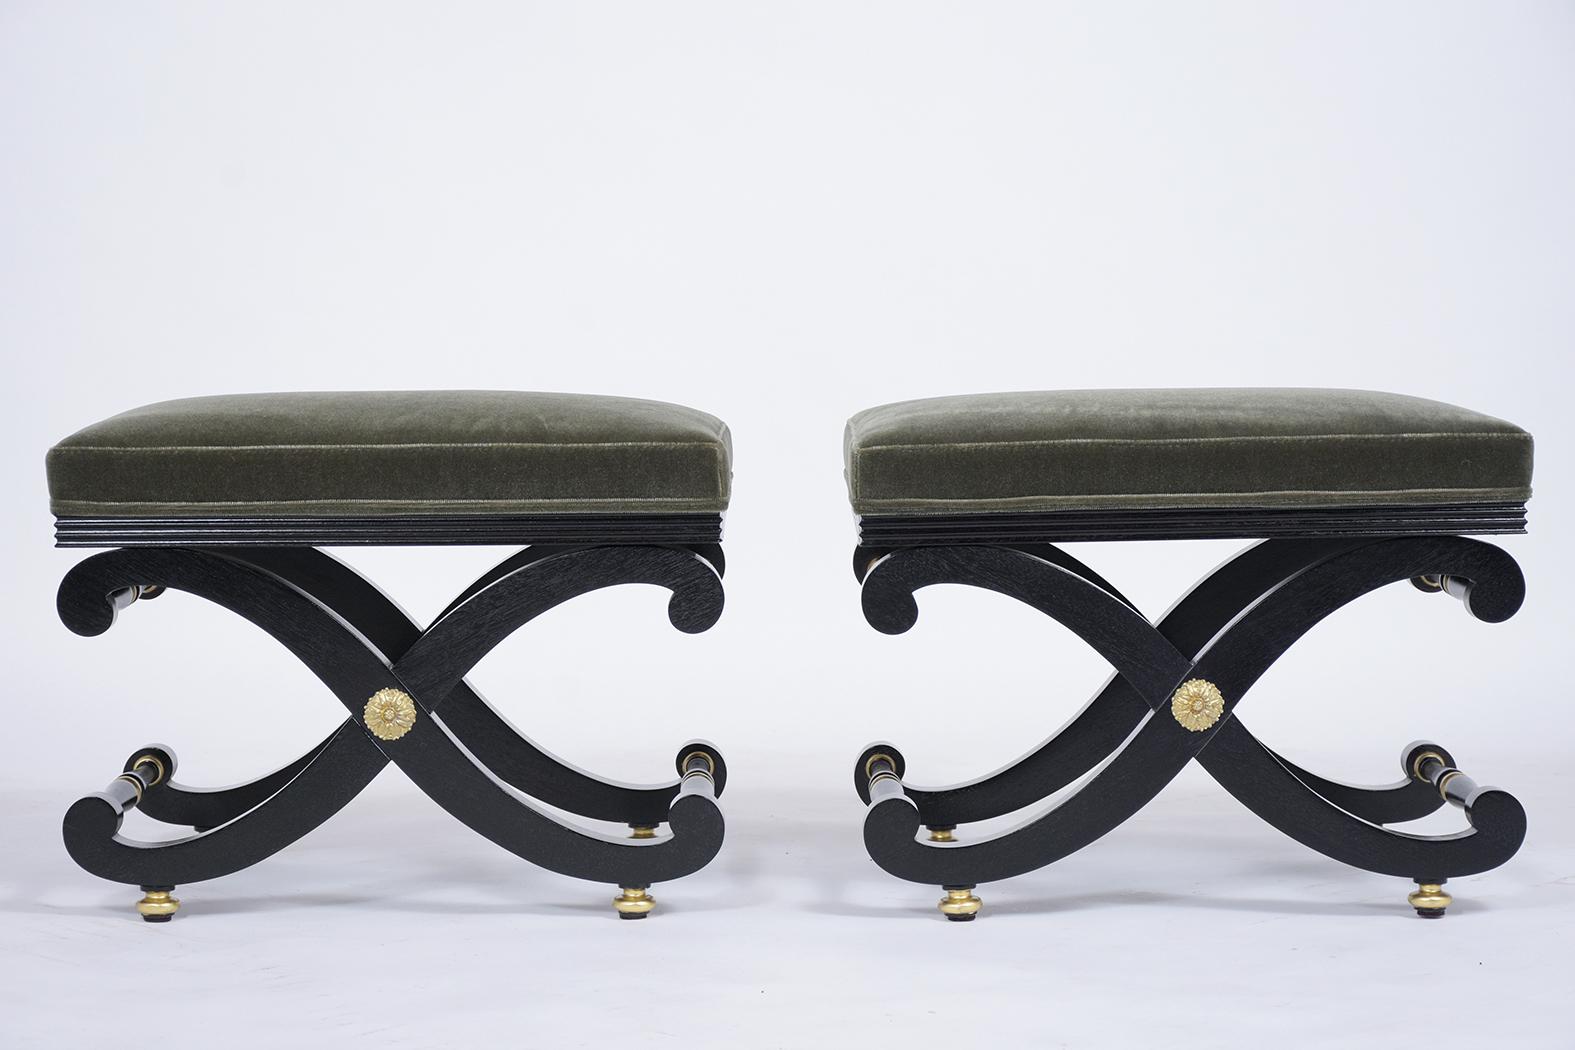 This pair of early 1900s benches have been fully restored, features a sturdy X base frame with brass accents, gilt details, and a newly ebonized lacquered finish. The stools have also been professionally upholstered in a new olive green mohair